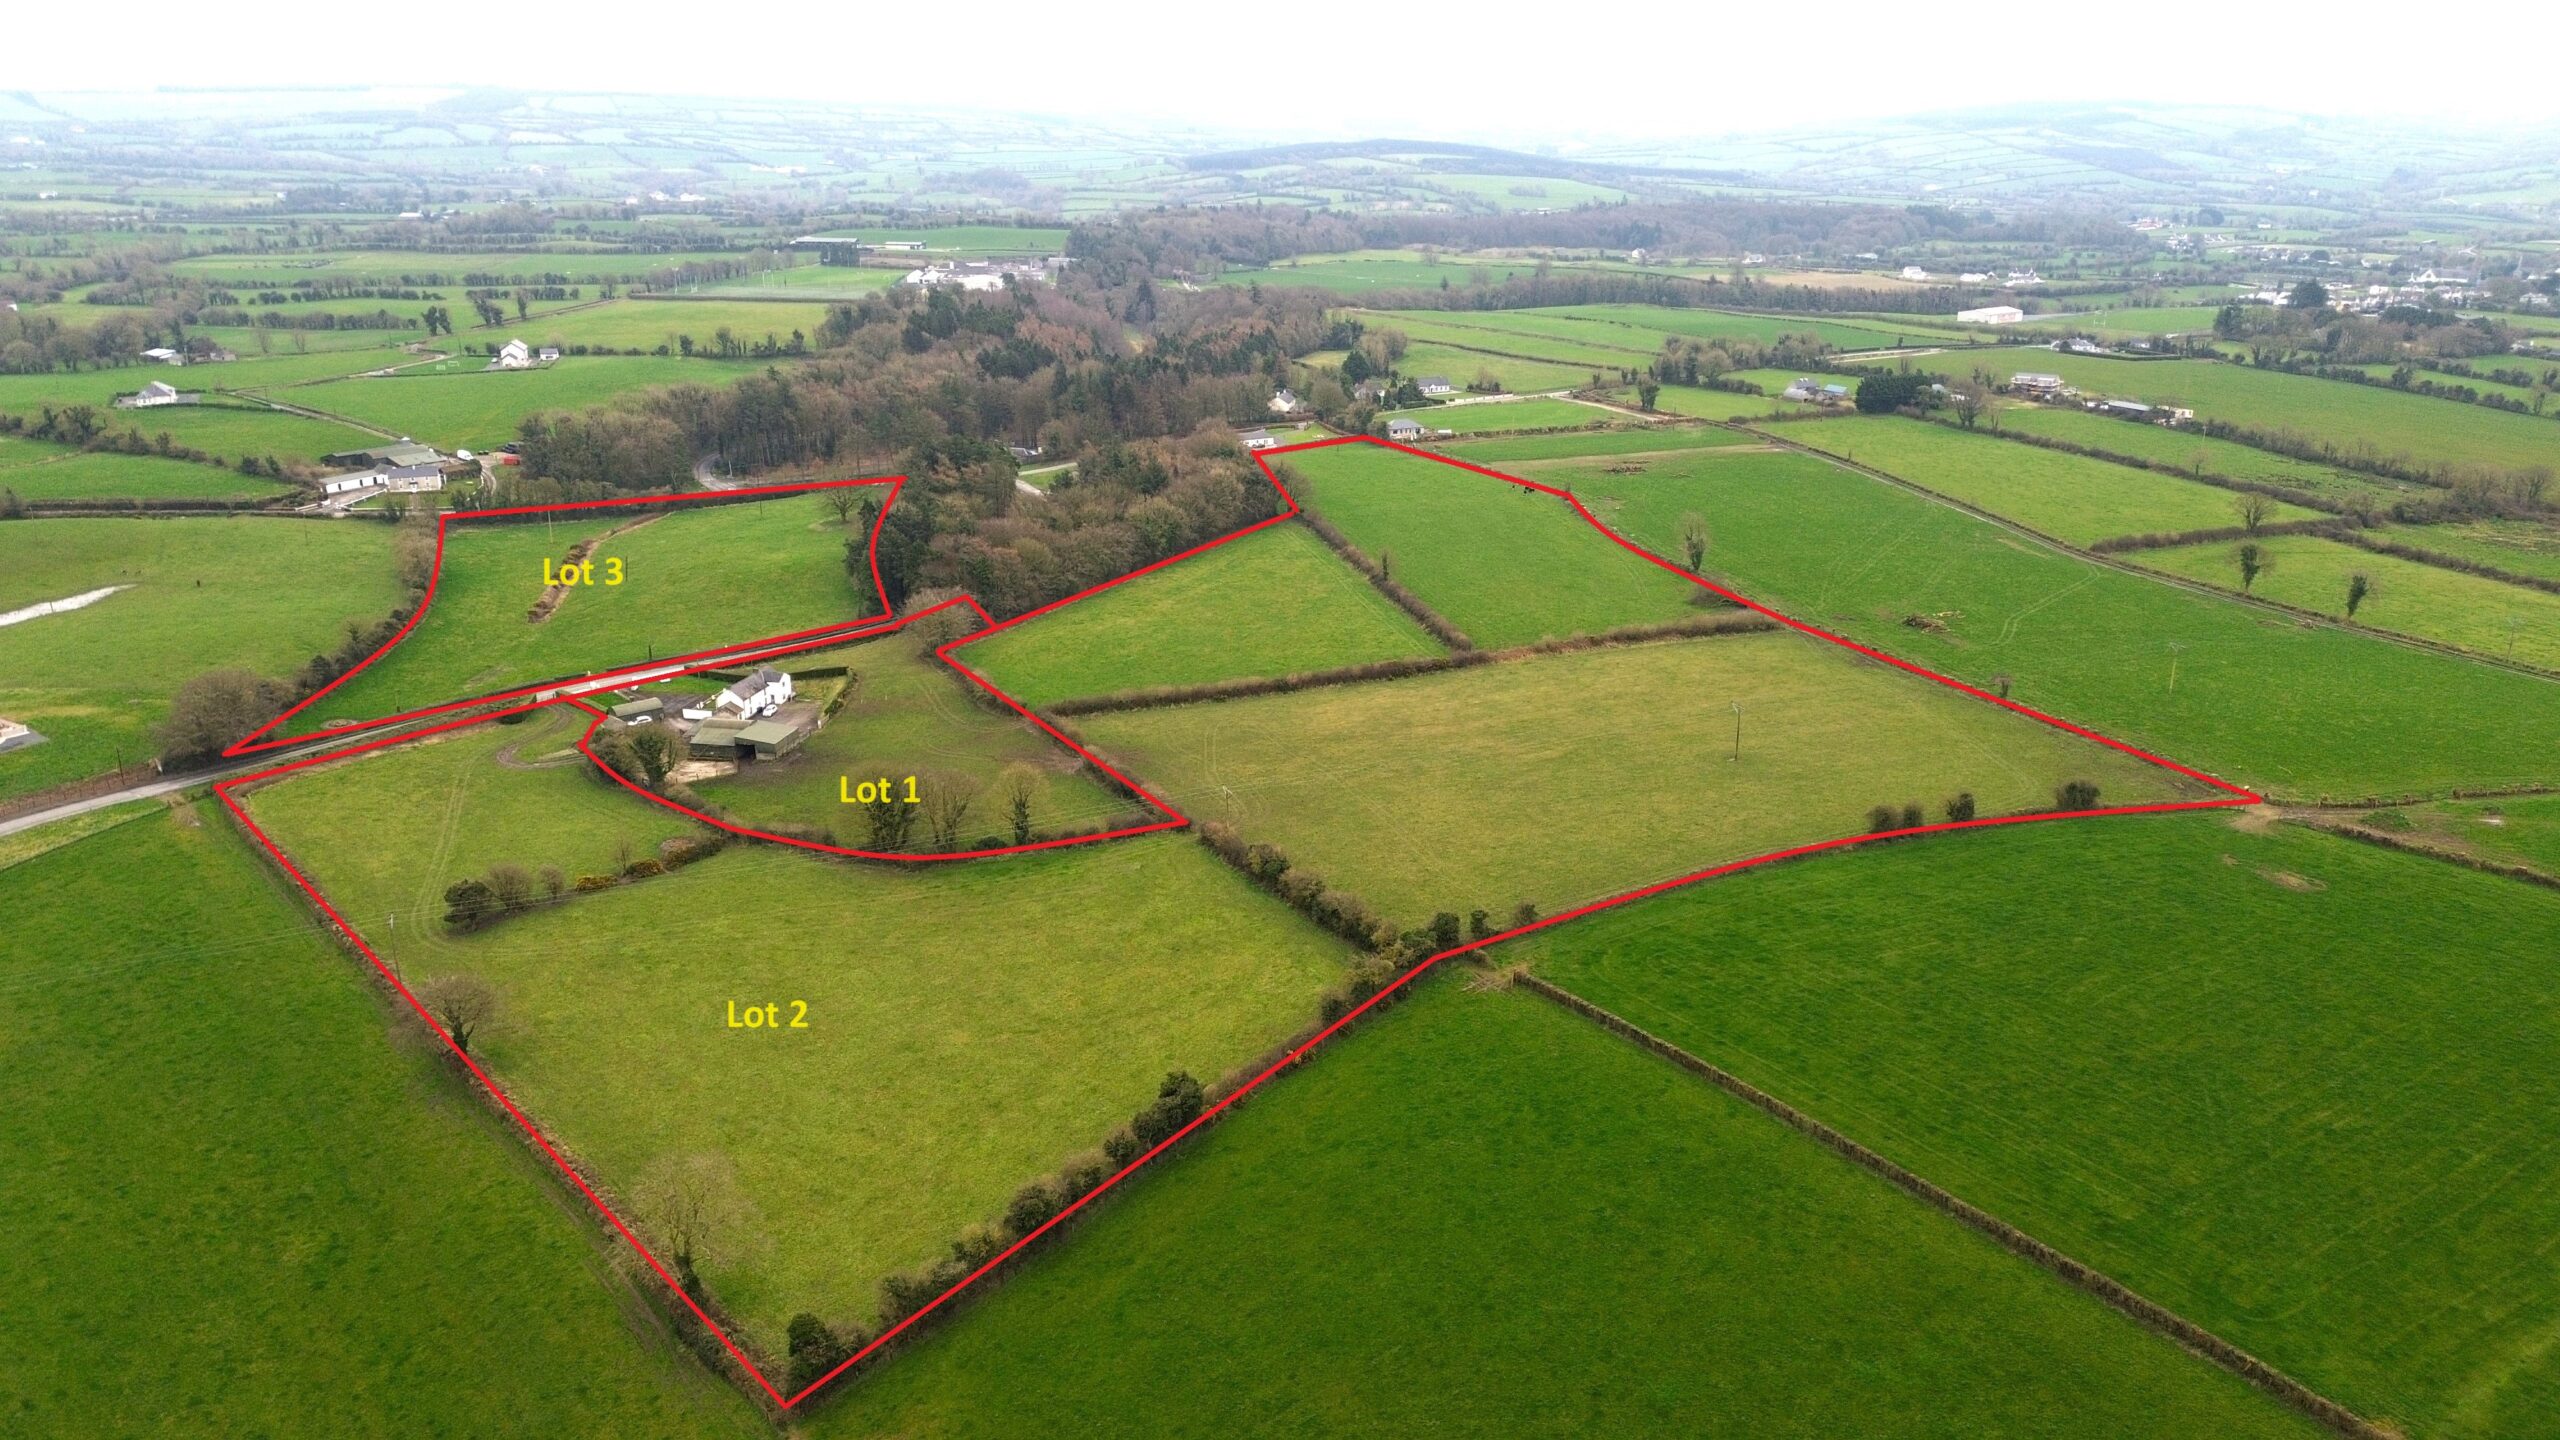 25 acre residential farm at Raggetstown, Ballinakill outlined in lots